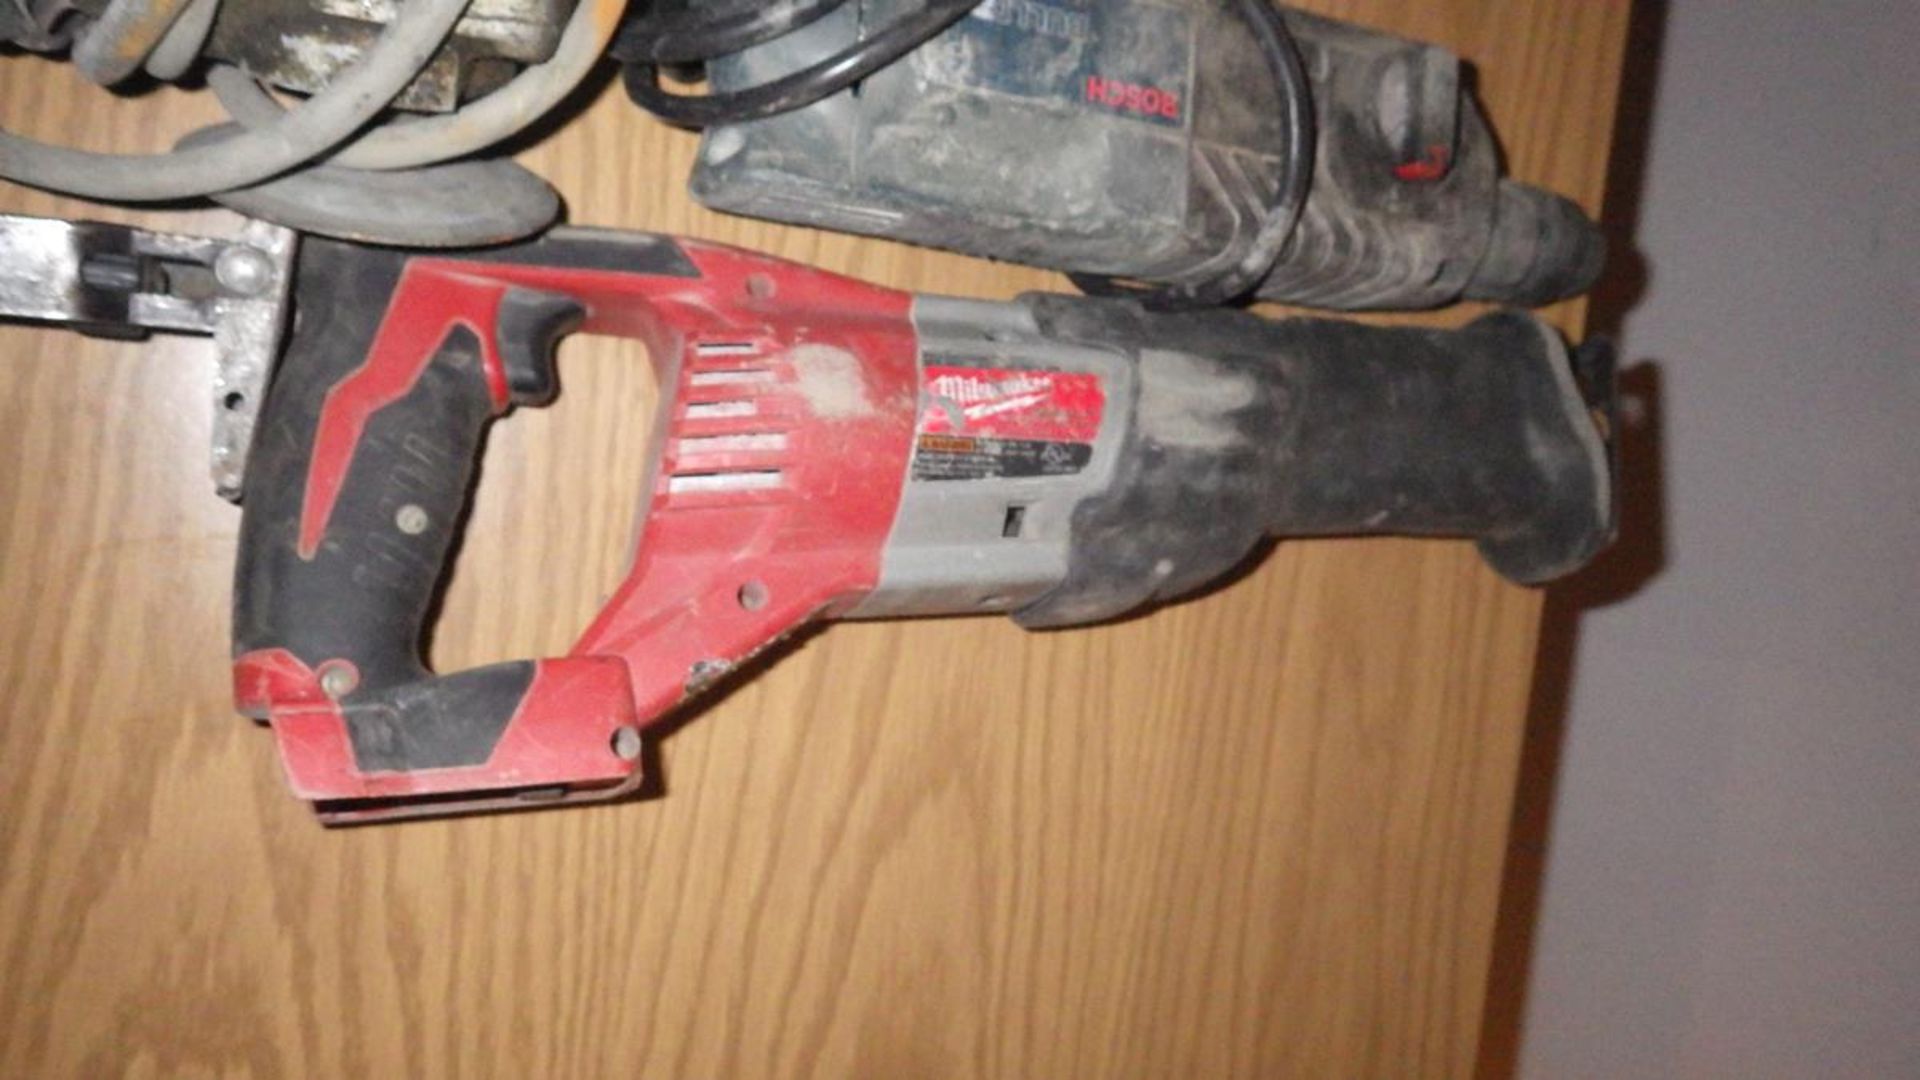 Two Milwaukee reciprocating saws one bosch hammer drill and one angle grinder - Image 4 of 5